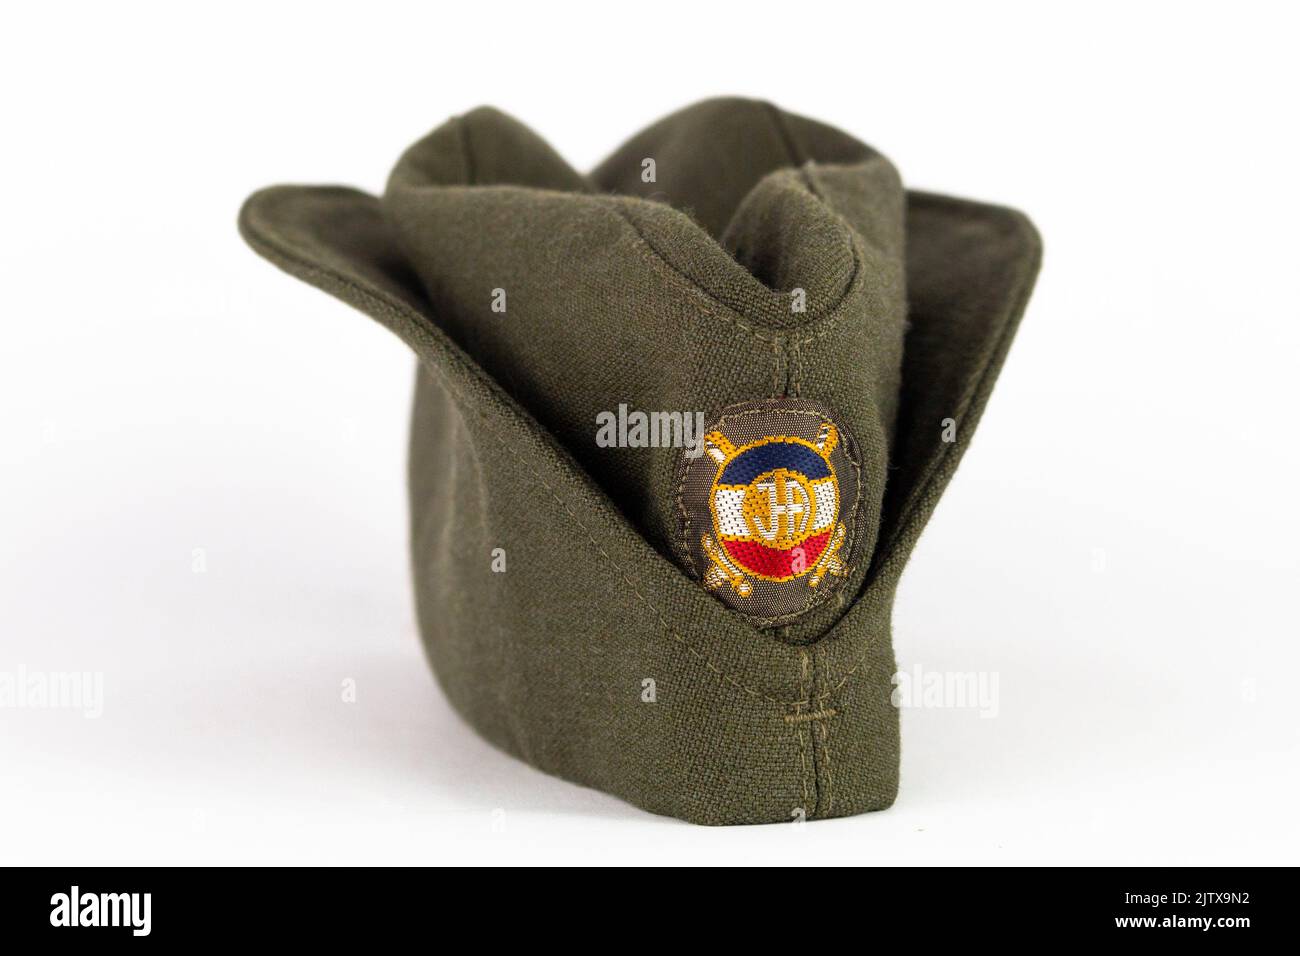 Military cap. Yugoslavian army side cap from the time of communism and world war era. Stock Photo